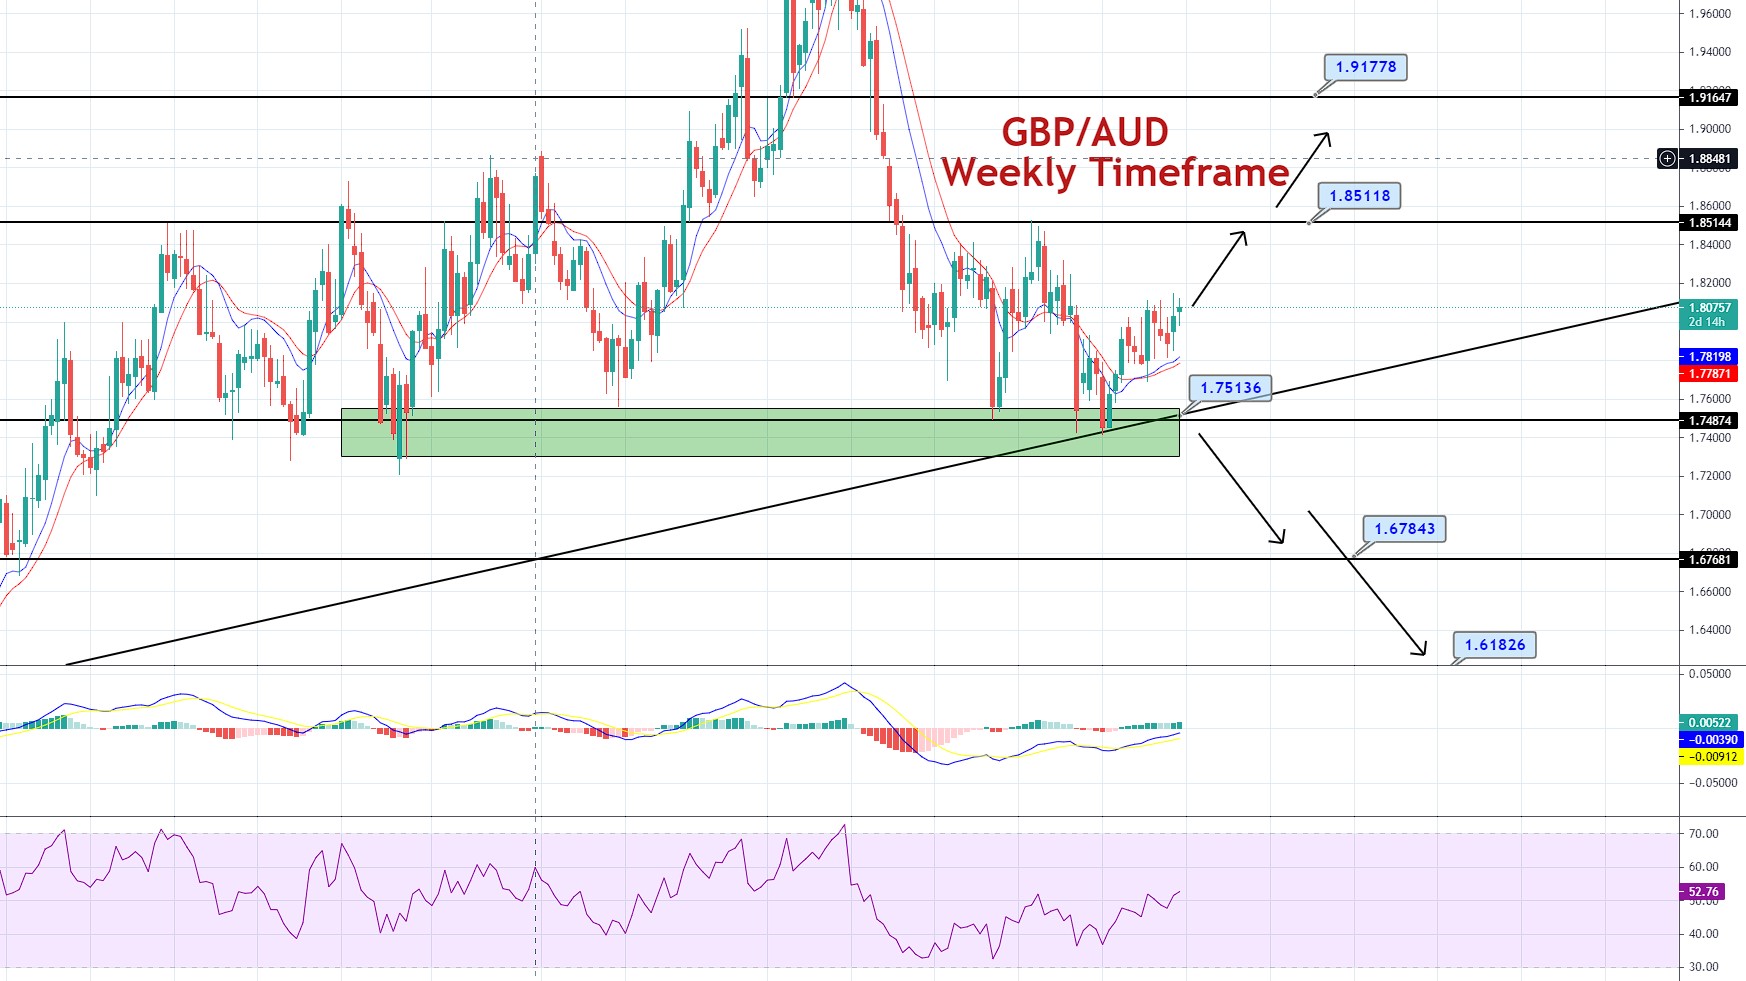 Forex news aud gbp forecast how to download forex Expert Advisors